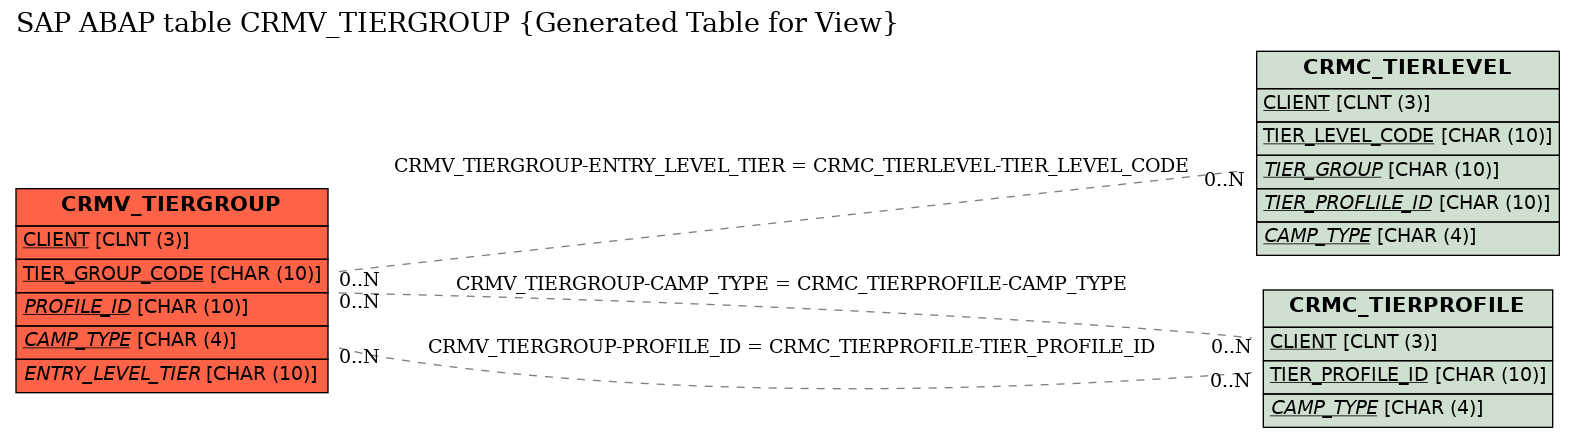 E-R Diagram for table CRMV_TIERGROUP (Generated Table for View)